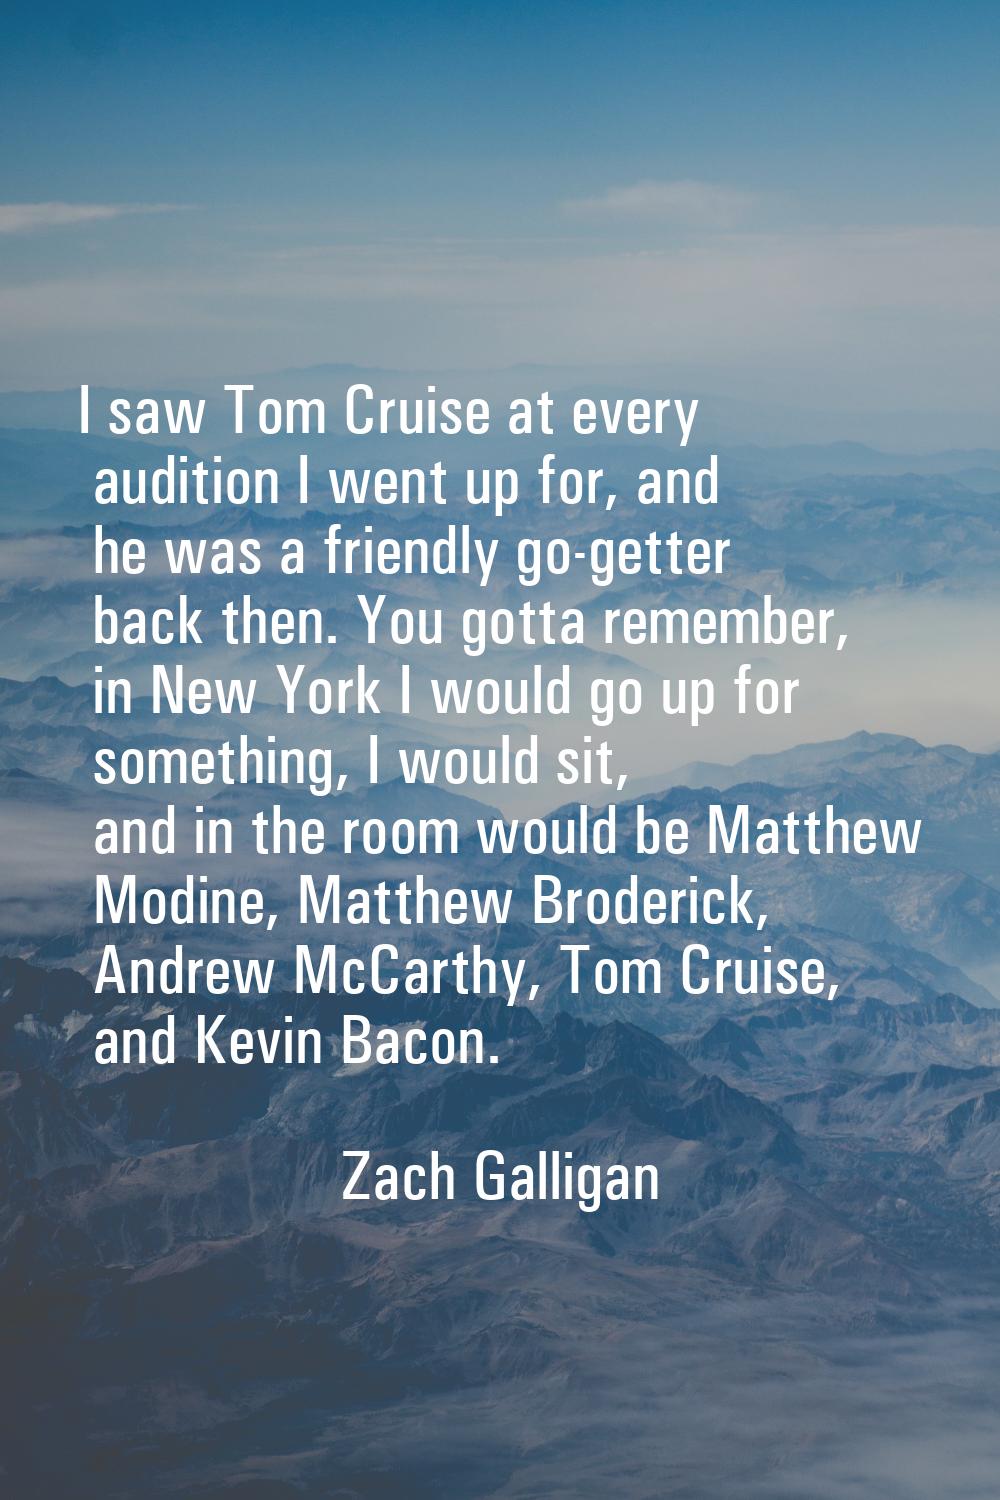 I saw Tom Cruise at every audition I went up for, and he was a friendly go-getter back then. You go